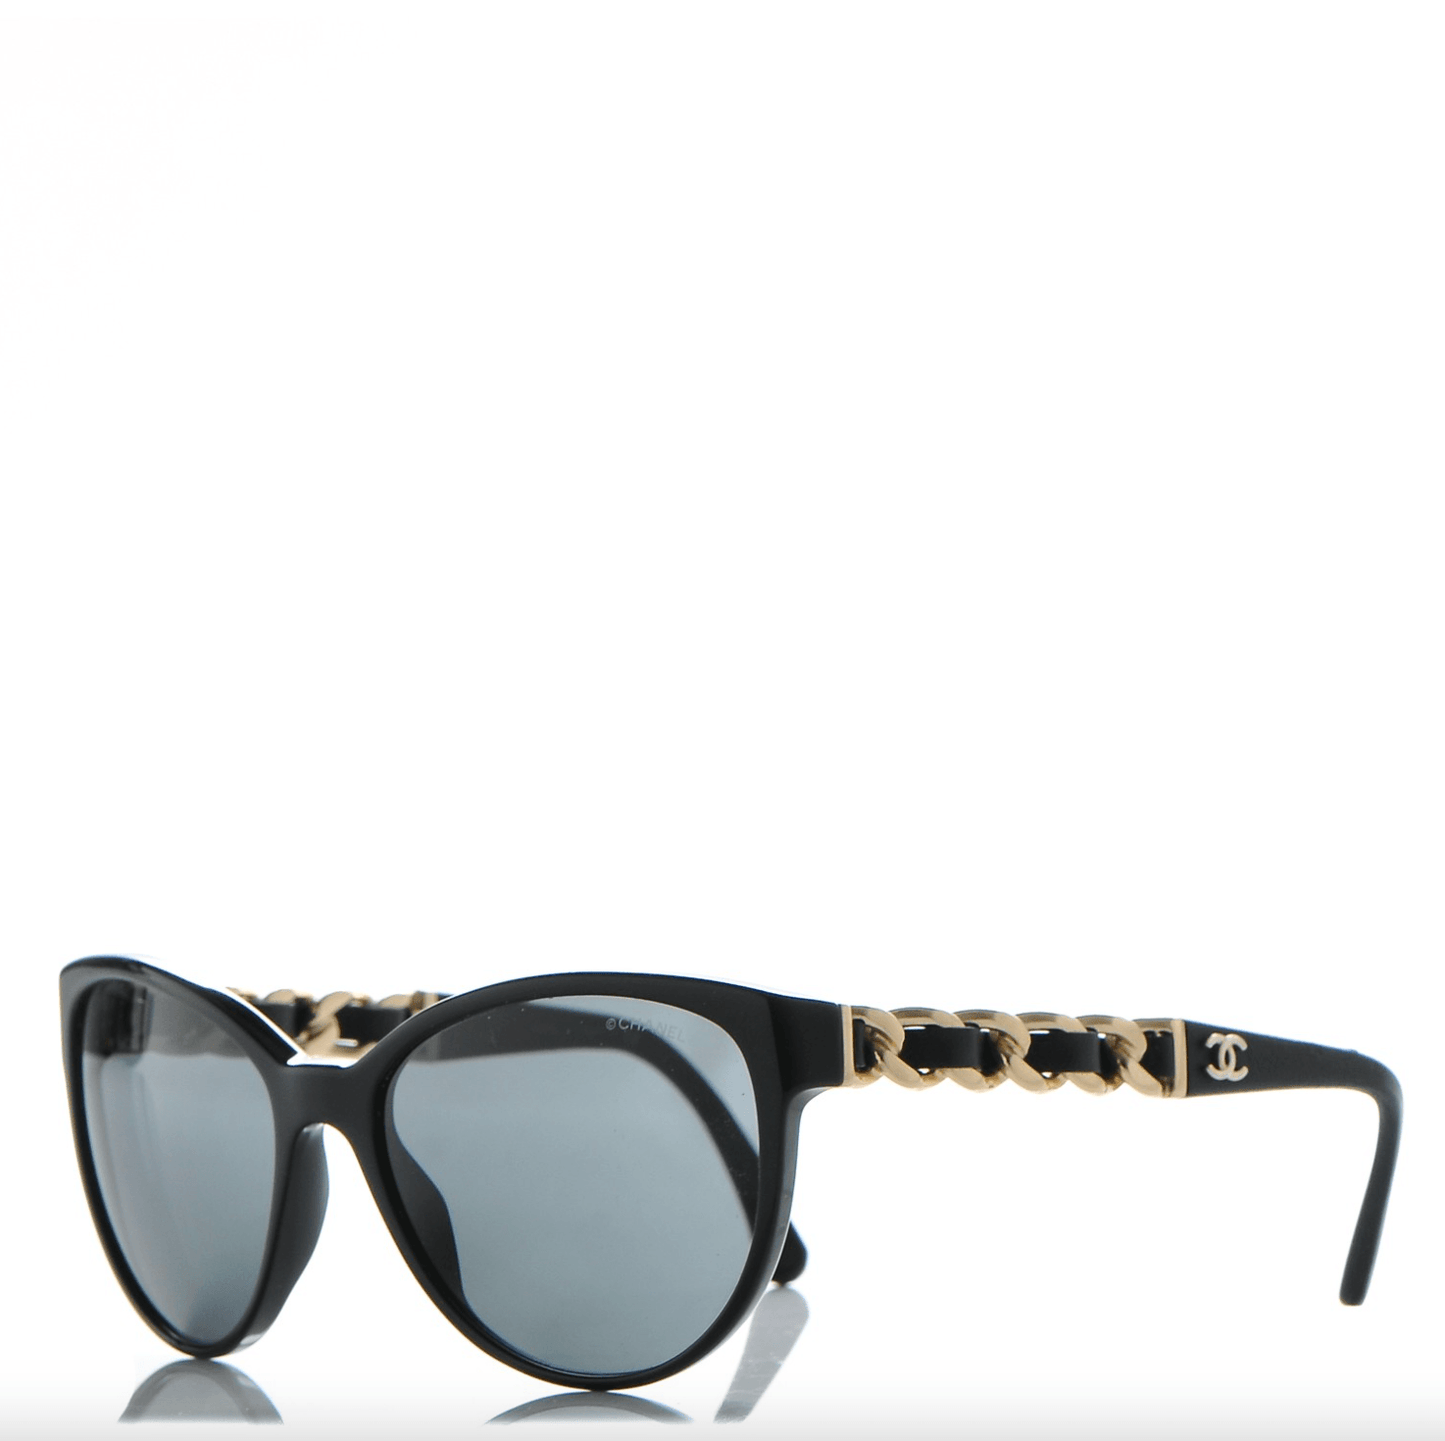 Butterfly Chain Sunglasses - Endless